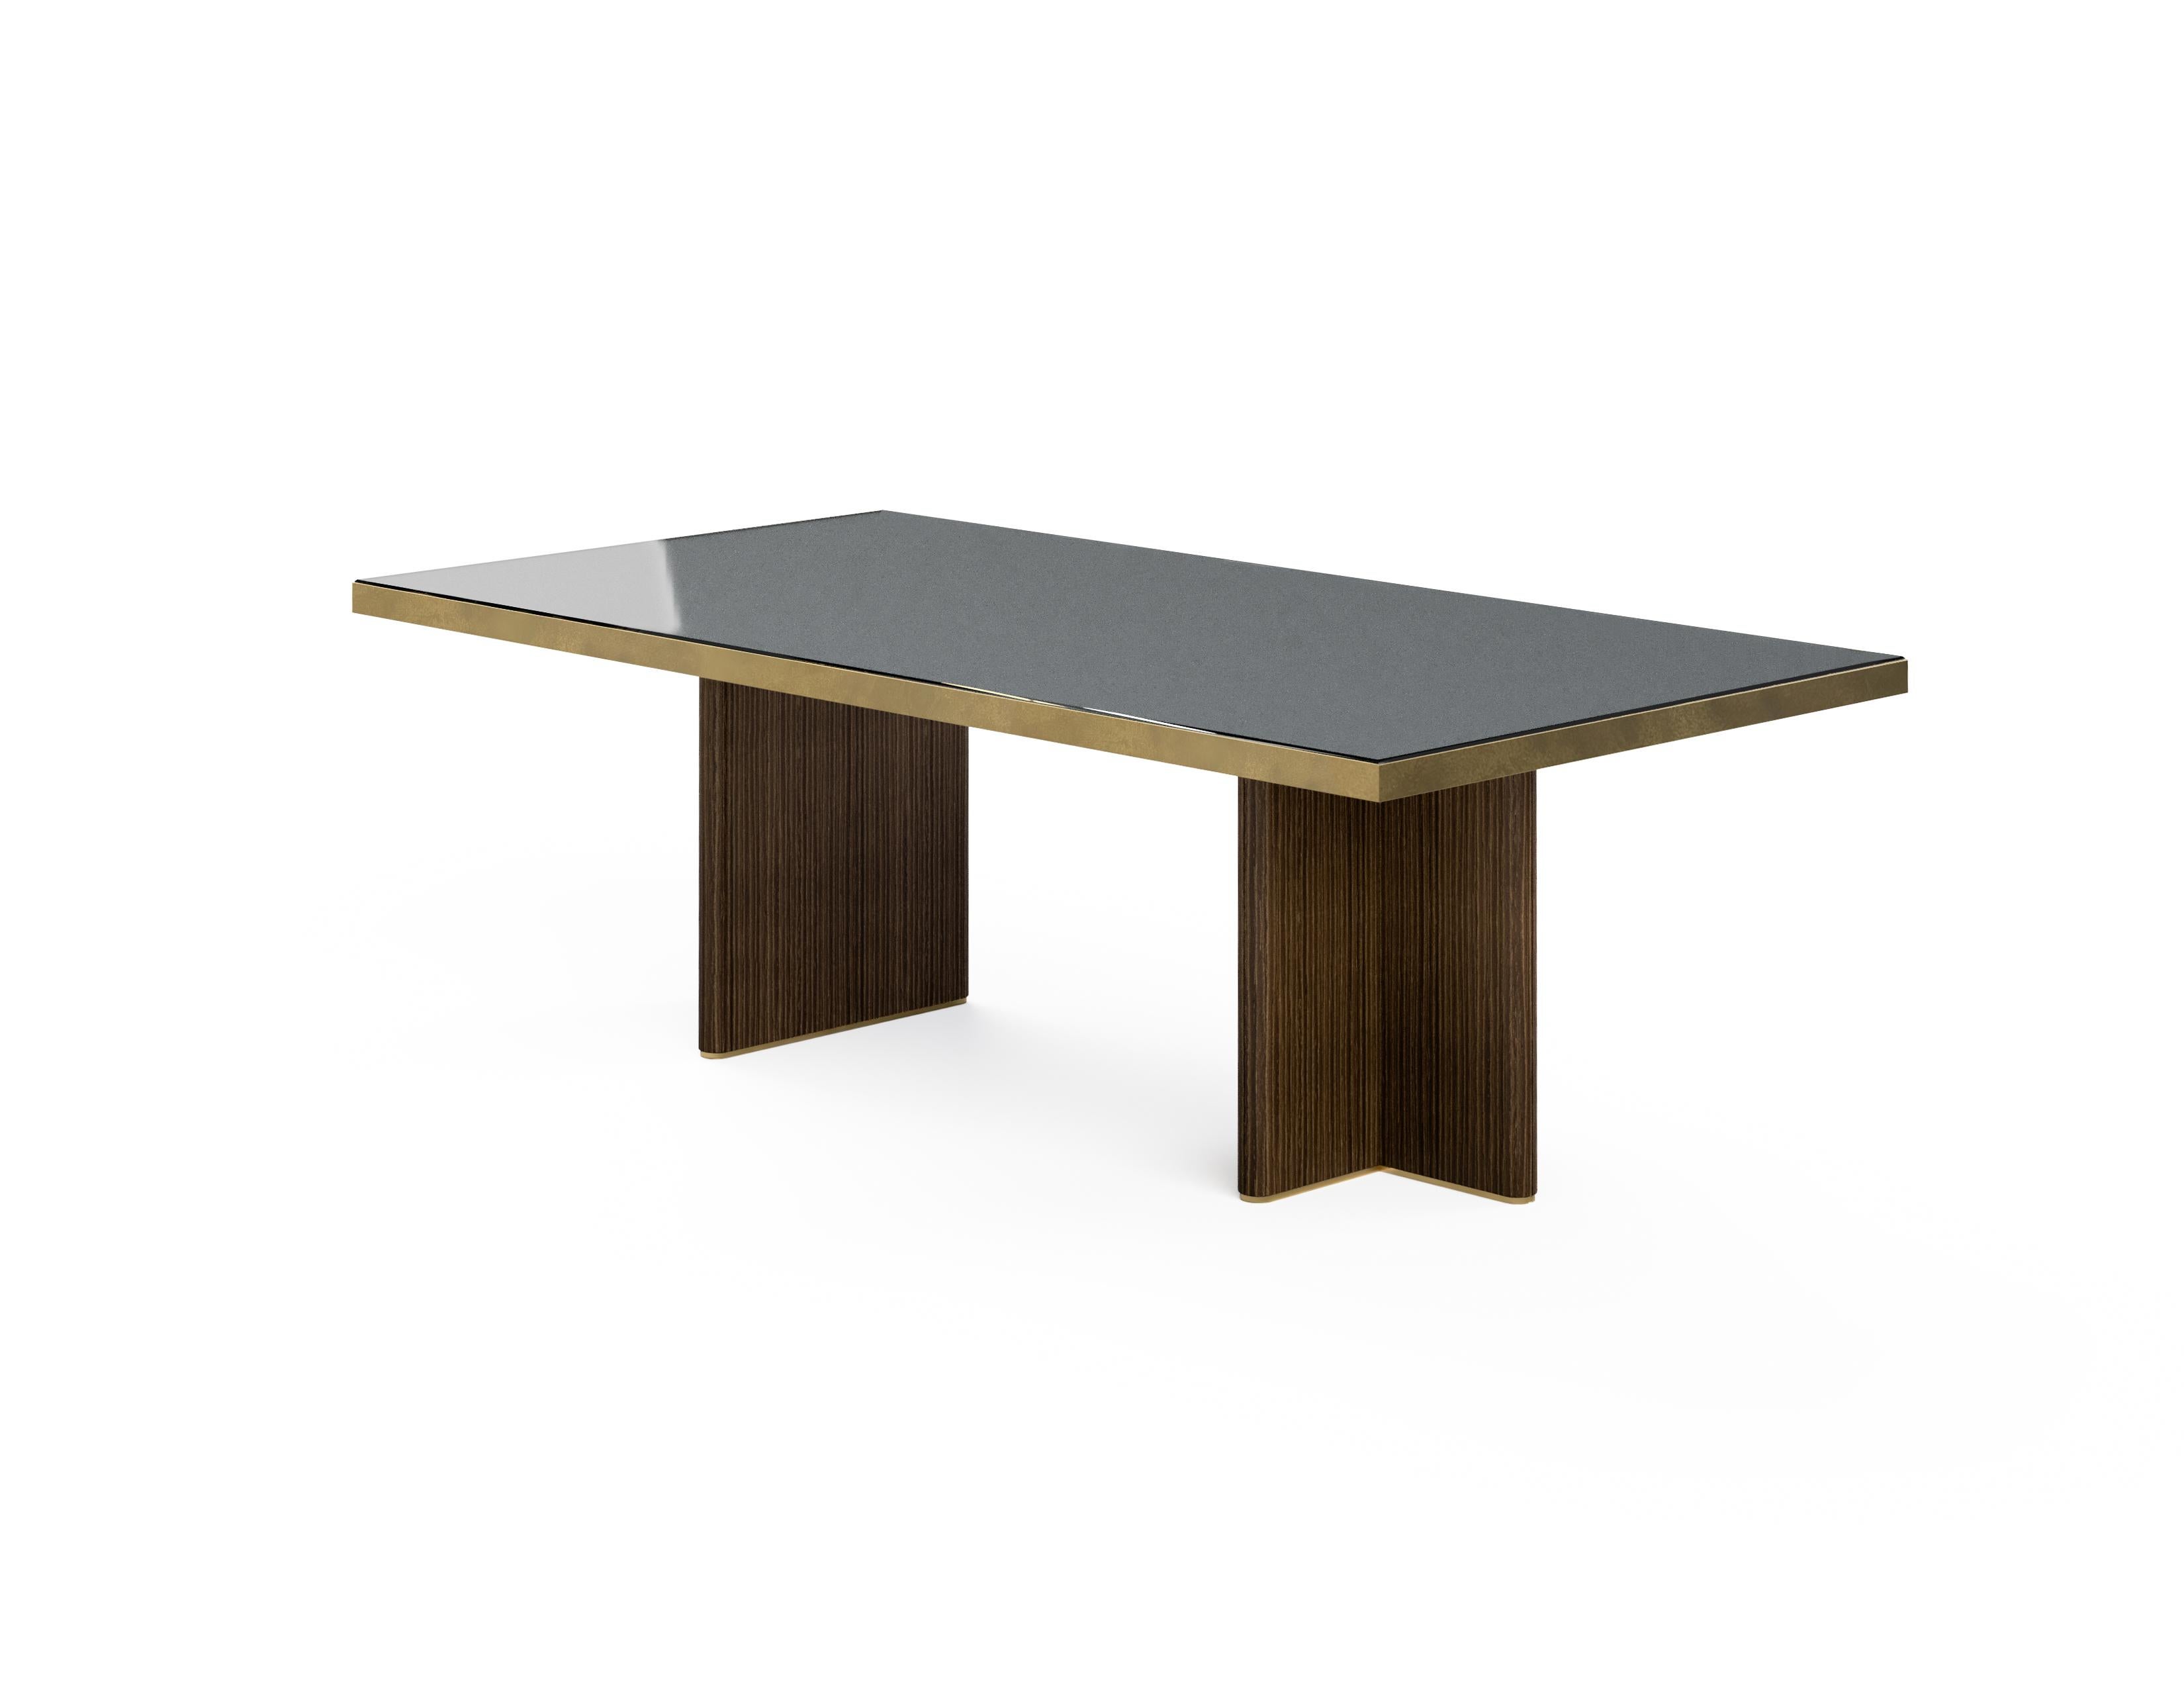 The T-shaped base form of the table combined with the milling oak veneer creates a wonderful linear pattern. Frame made of acid-soaked brass, adds a different sophisticated dimension to the table.

Material & Finish 

Top: Back painted glass 

Top